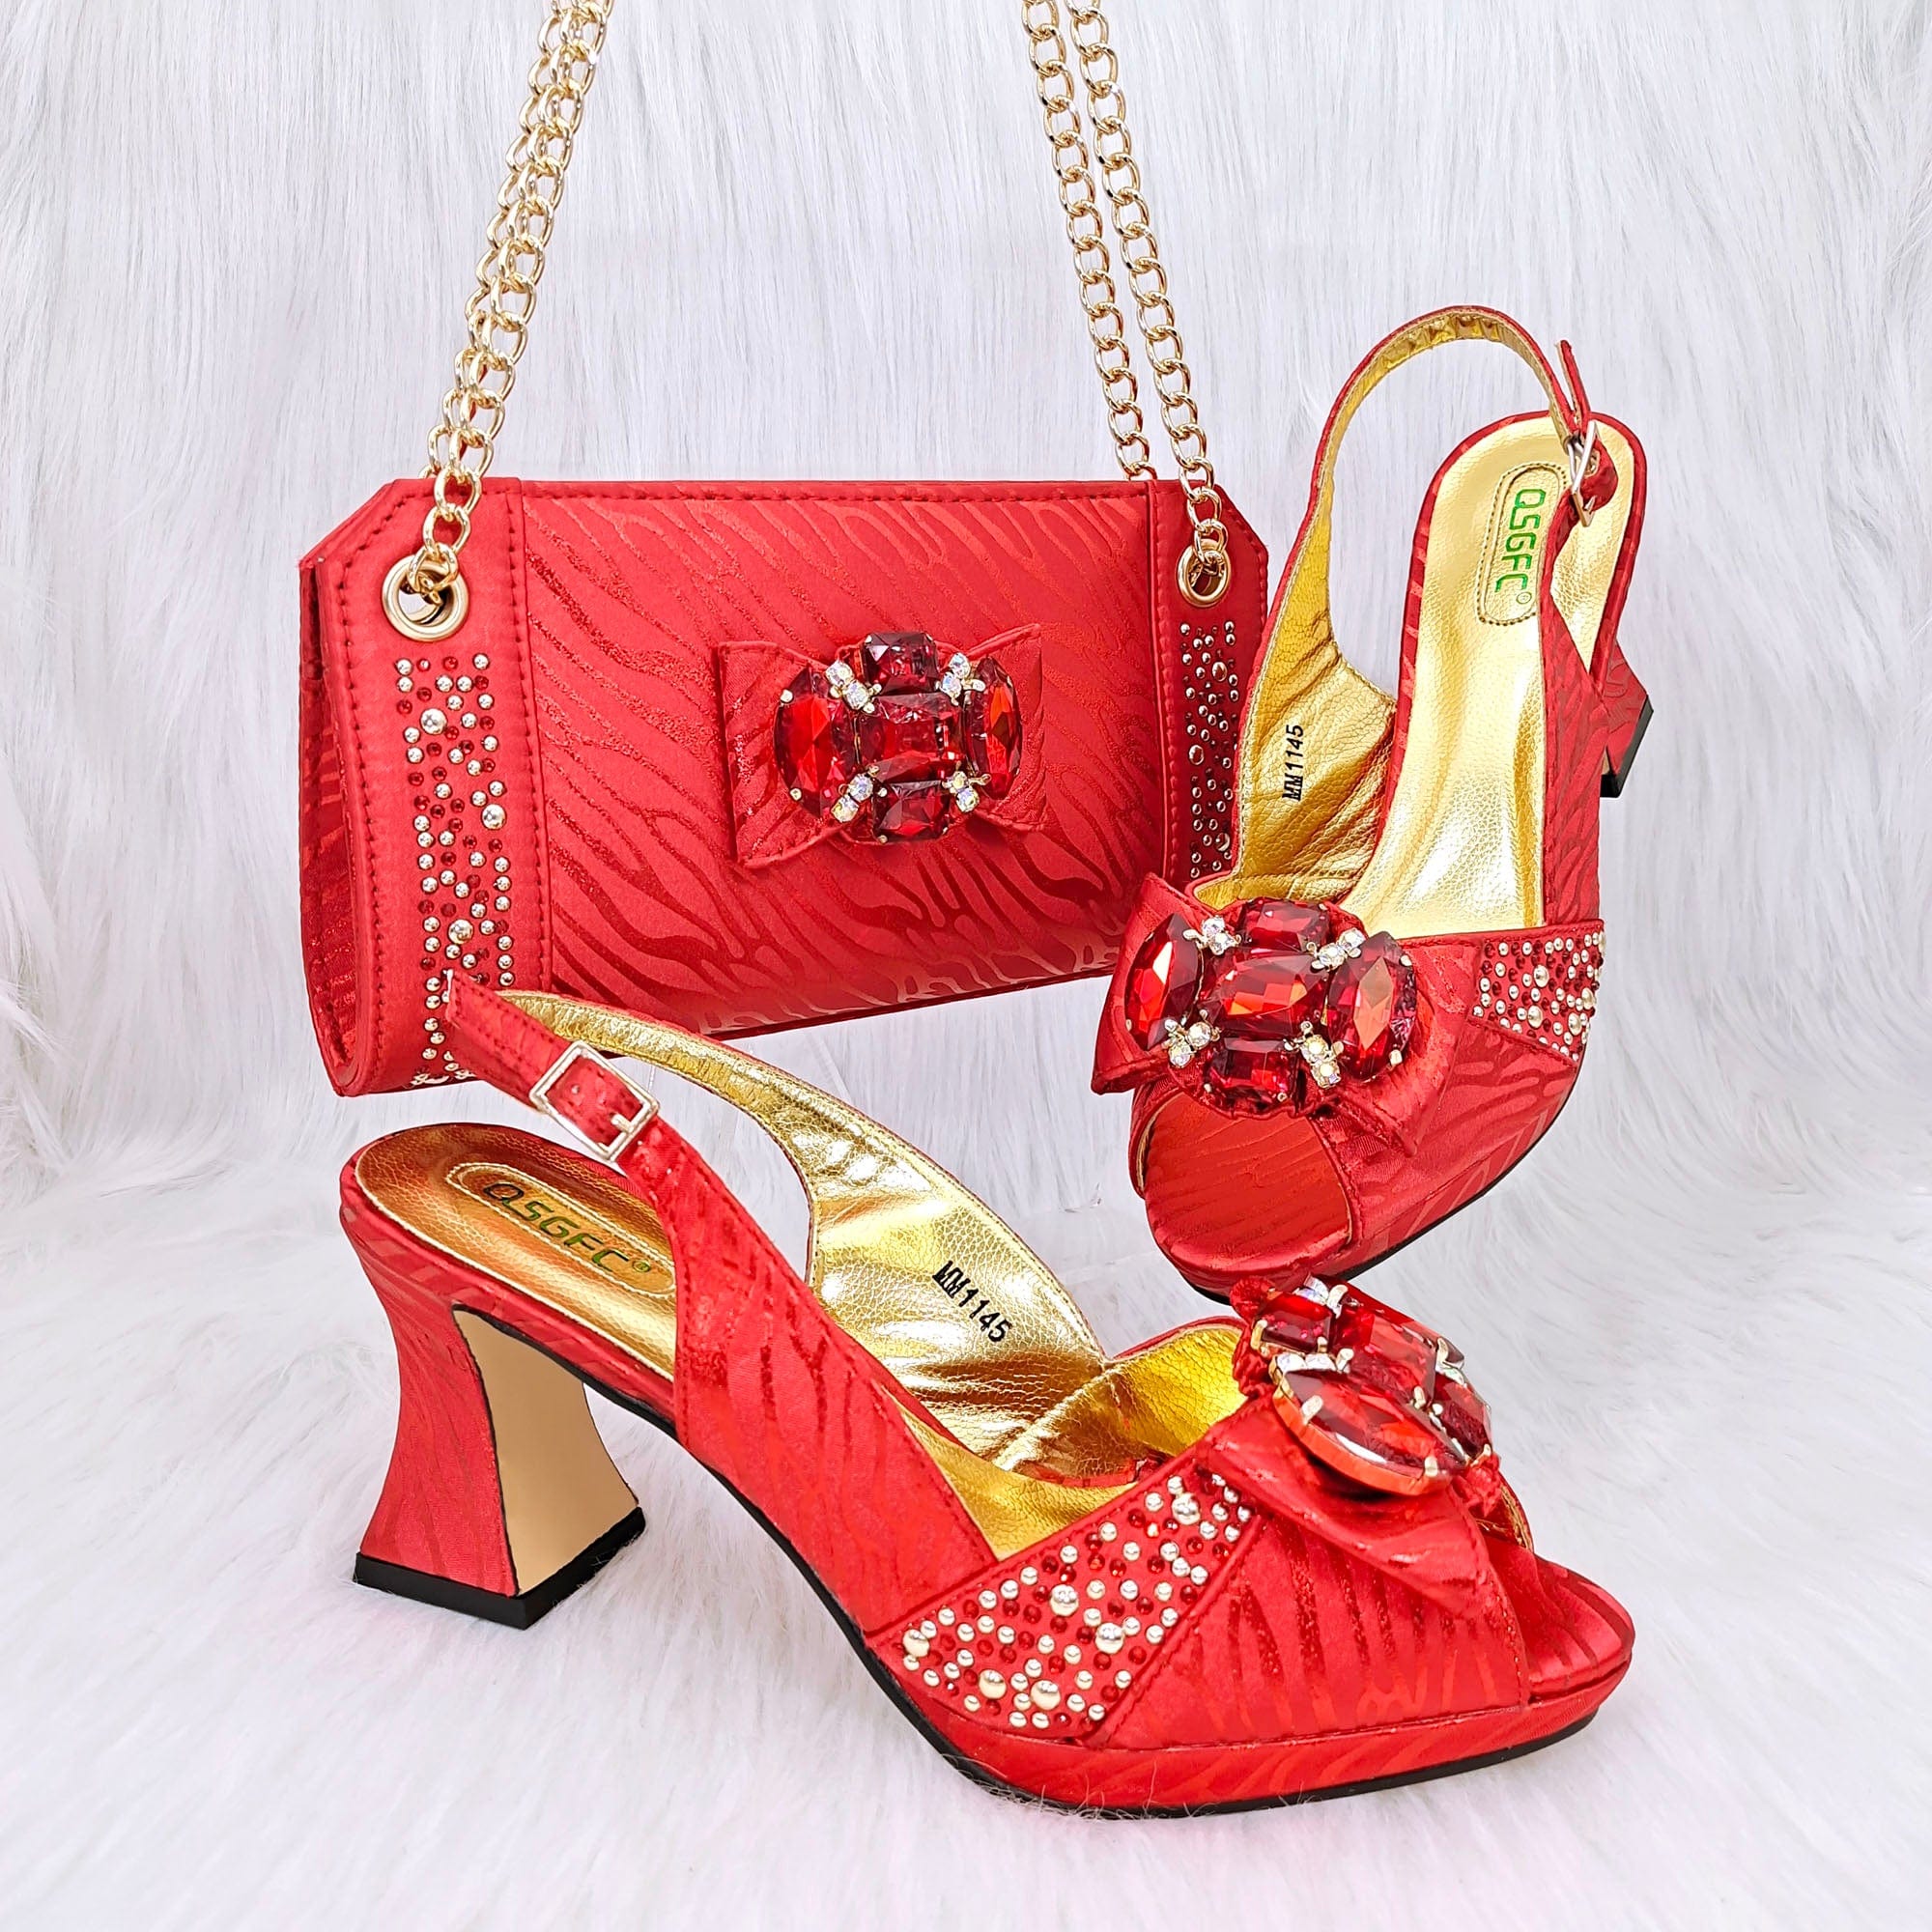 Ladies African Shoes And Purse Set